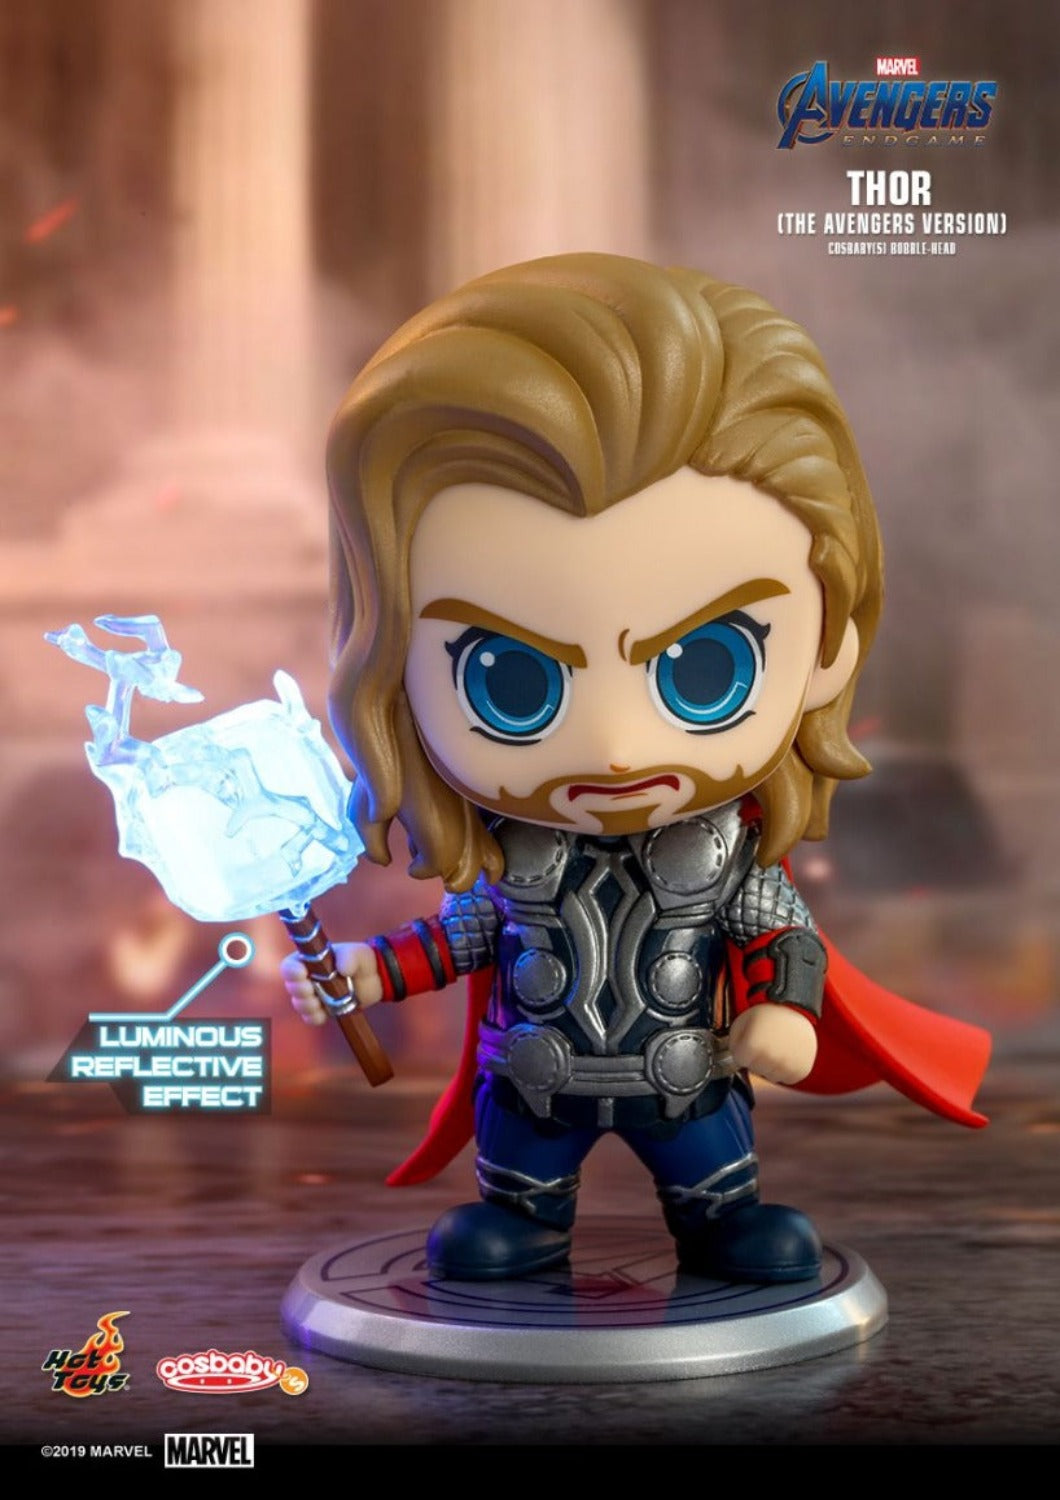 THOR THE AVENGERS VERSION